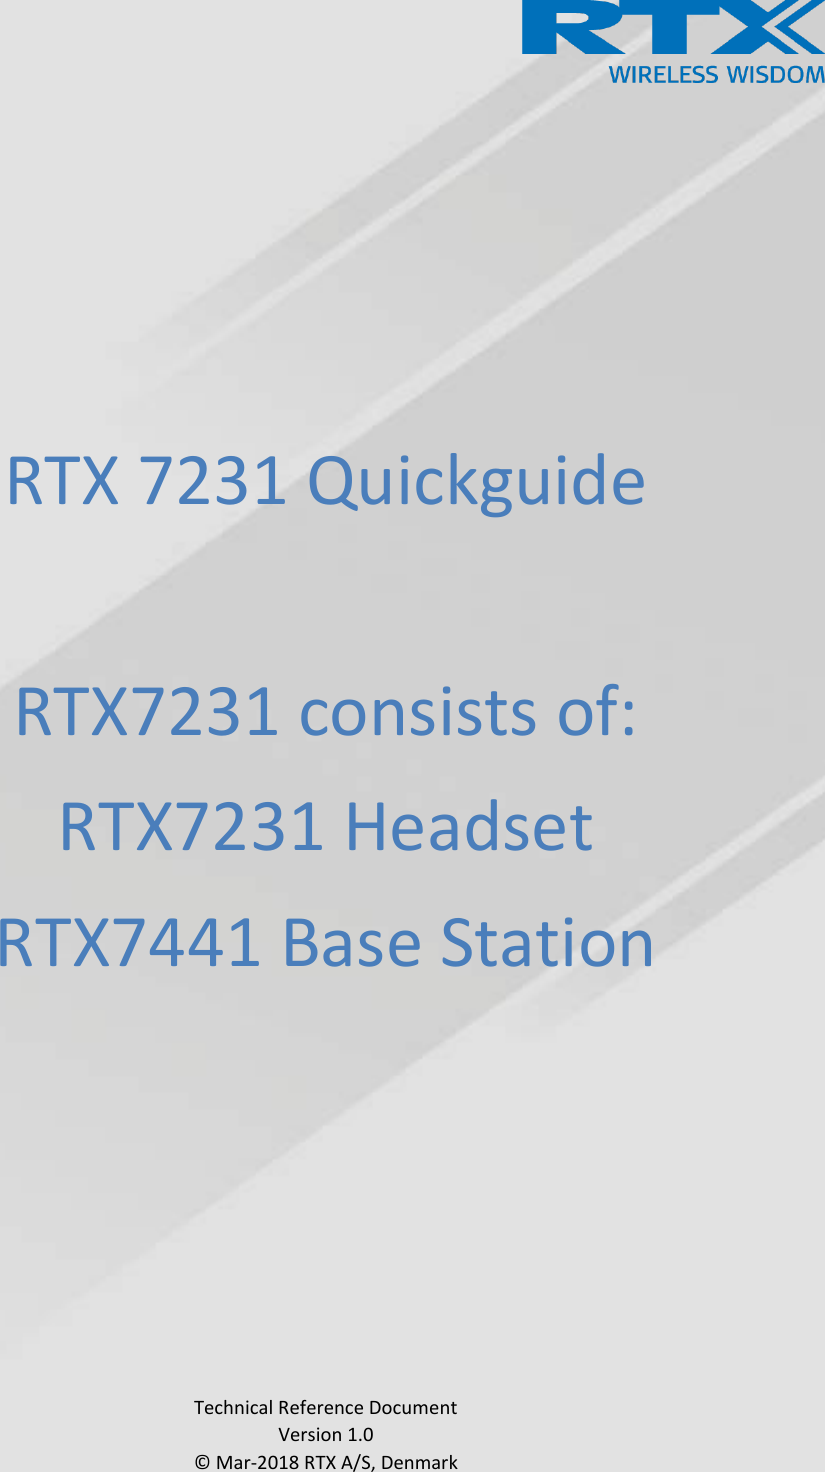      RTX 7231 Quickguide  RTX7231 consists of: RTX7231 Headset RTX7441 Base Station               Technical Reference Document Version 1.0 © Mar-2018 RTX A/S, Denmark 